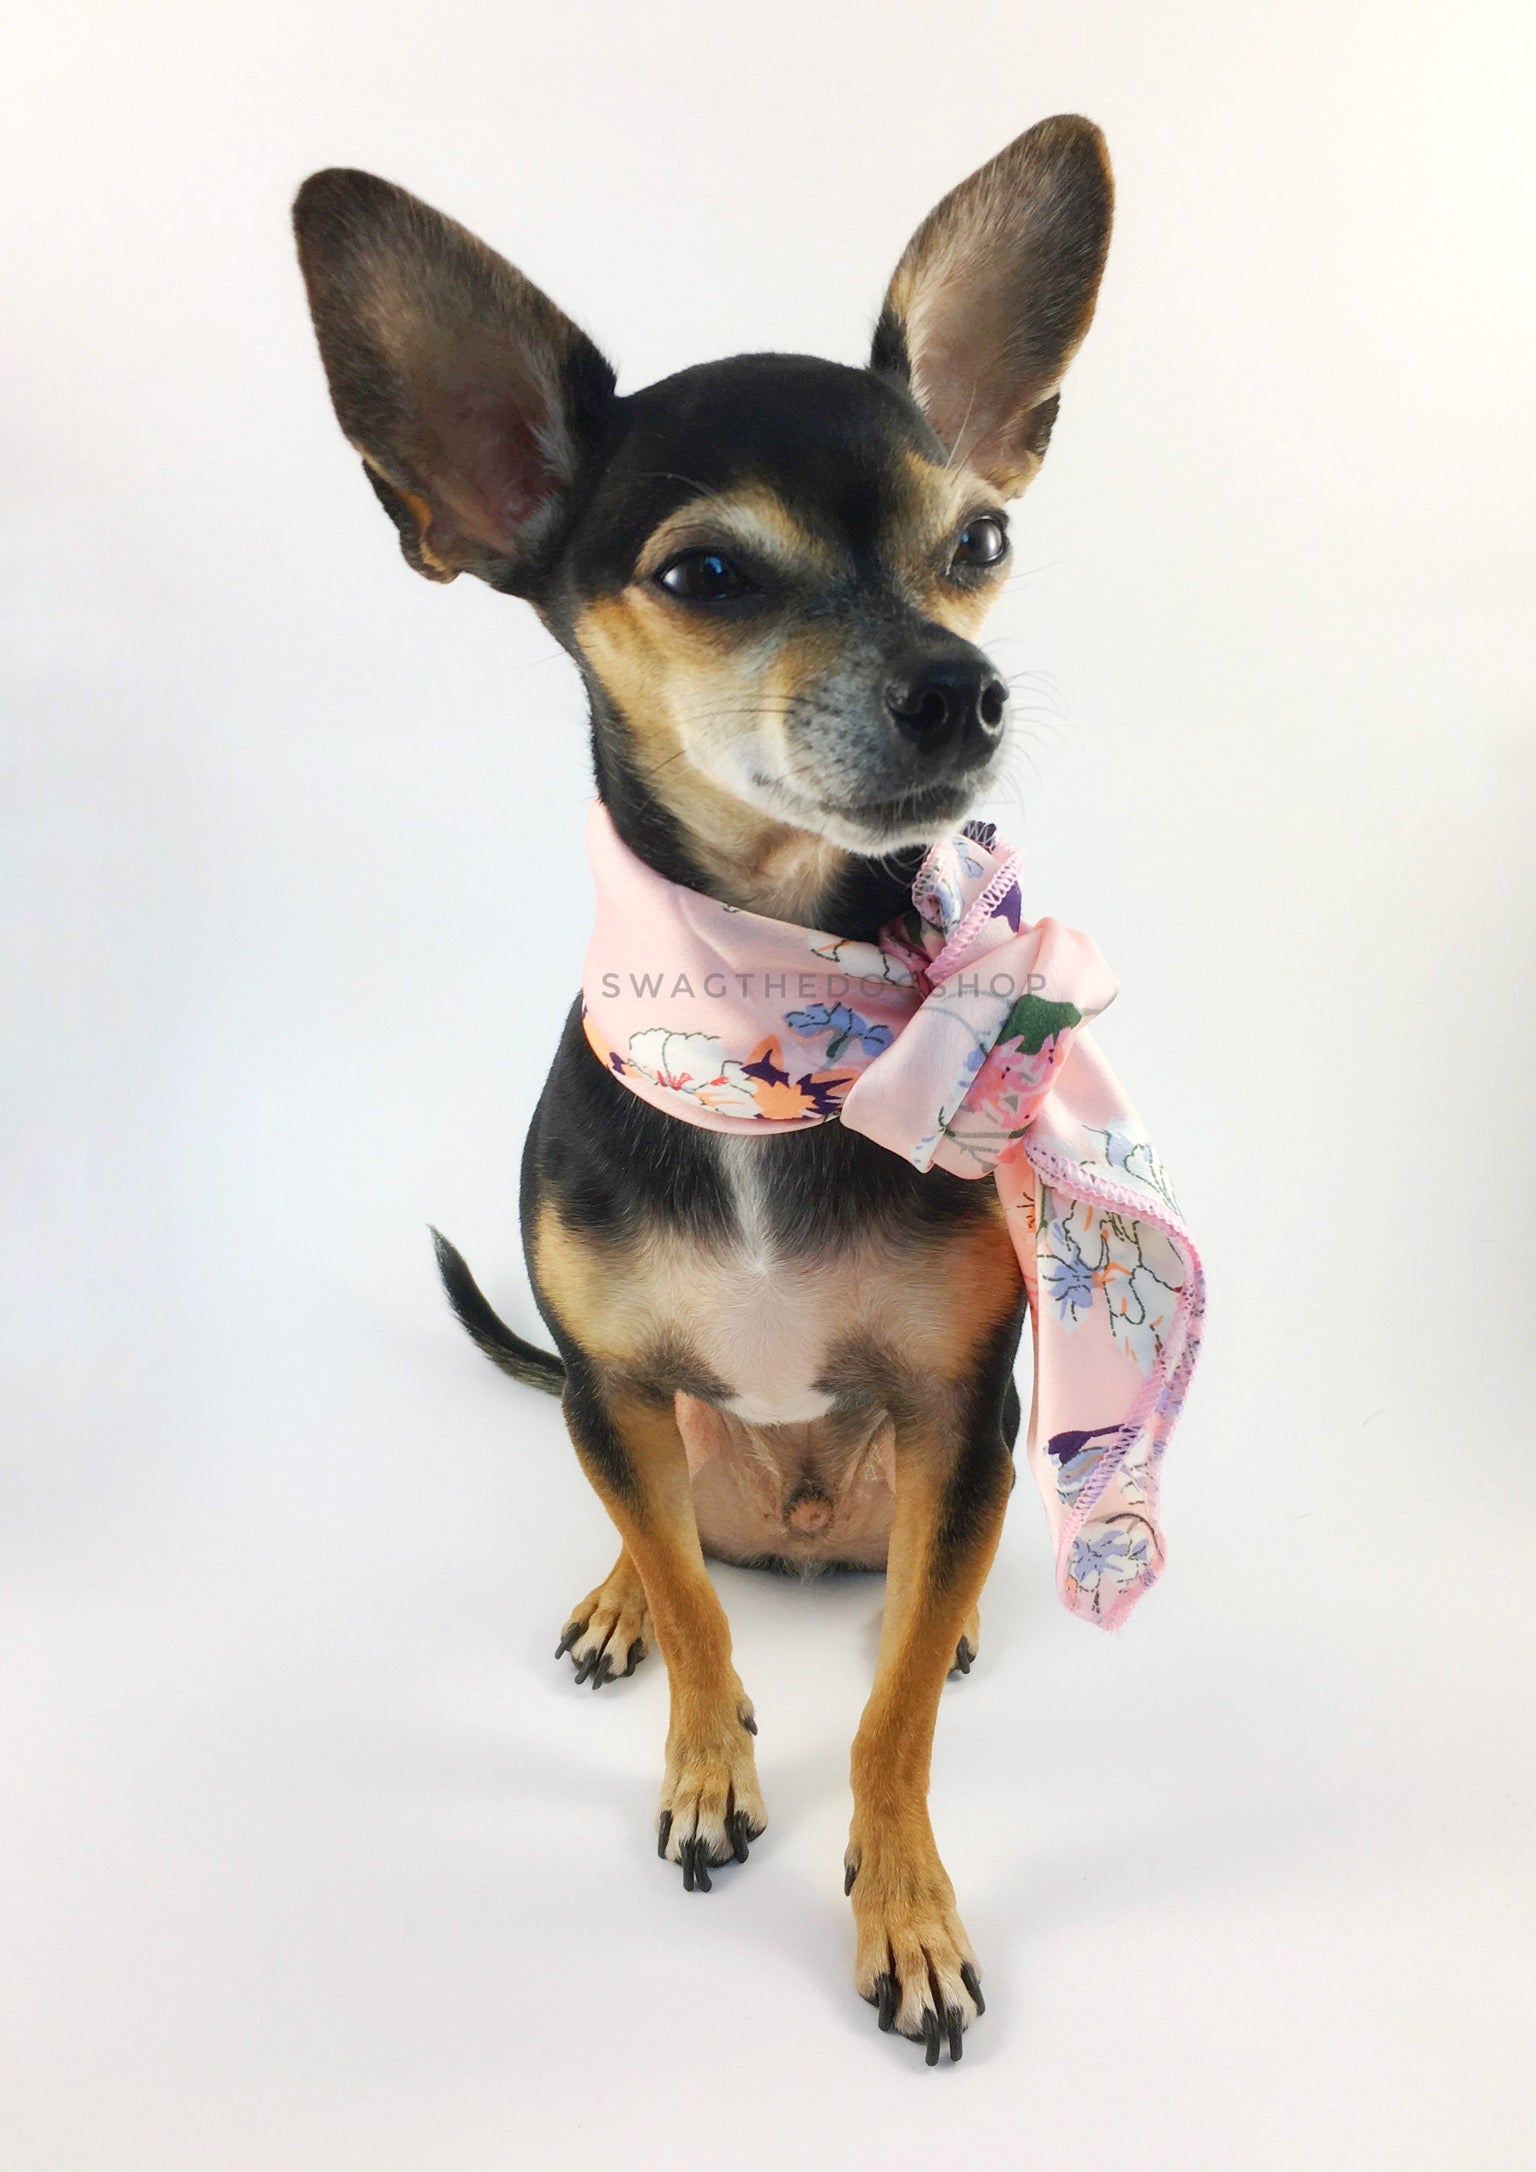 Pink Wild Flower Swagdana Scarf - Full Front View of Cute Chihuahua Wearing Swagdana Scarf as Neckerchief. Dog Bandana. Dog Scarf.